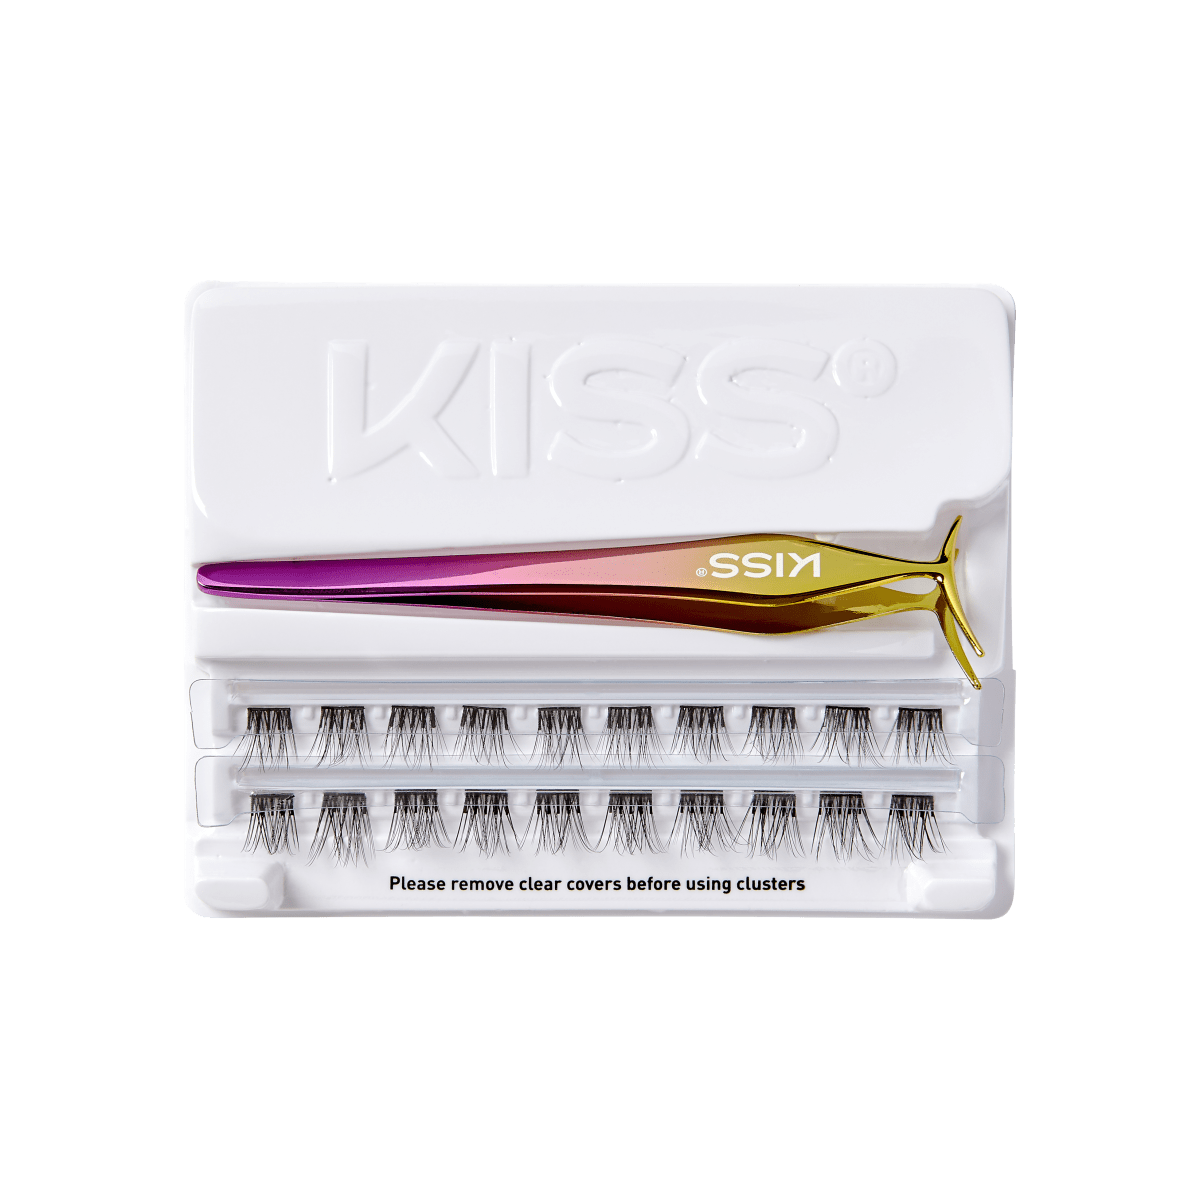  imPRESS KISS Falsies False Eyelashes, Lash Clusters, Natural',  12 mm, Includes 20 Clusters, 1 applicator, Contact Lens Friendly, Easy to  Apply, Reusable Strip Lashes : Beauty & Personal Care